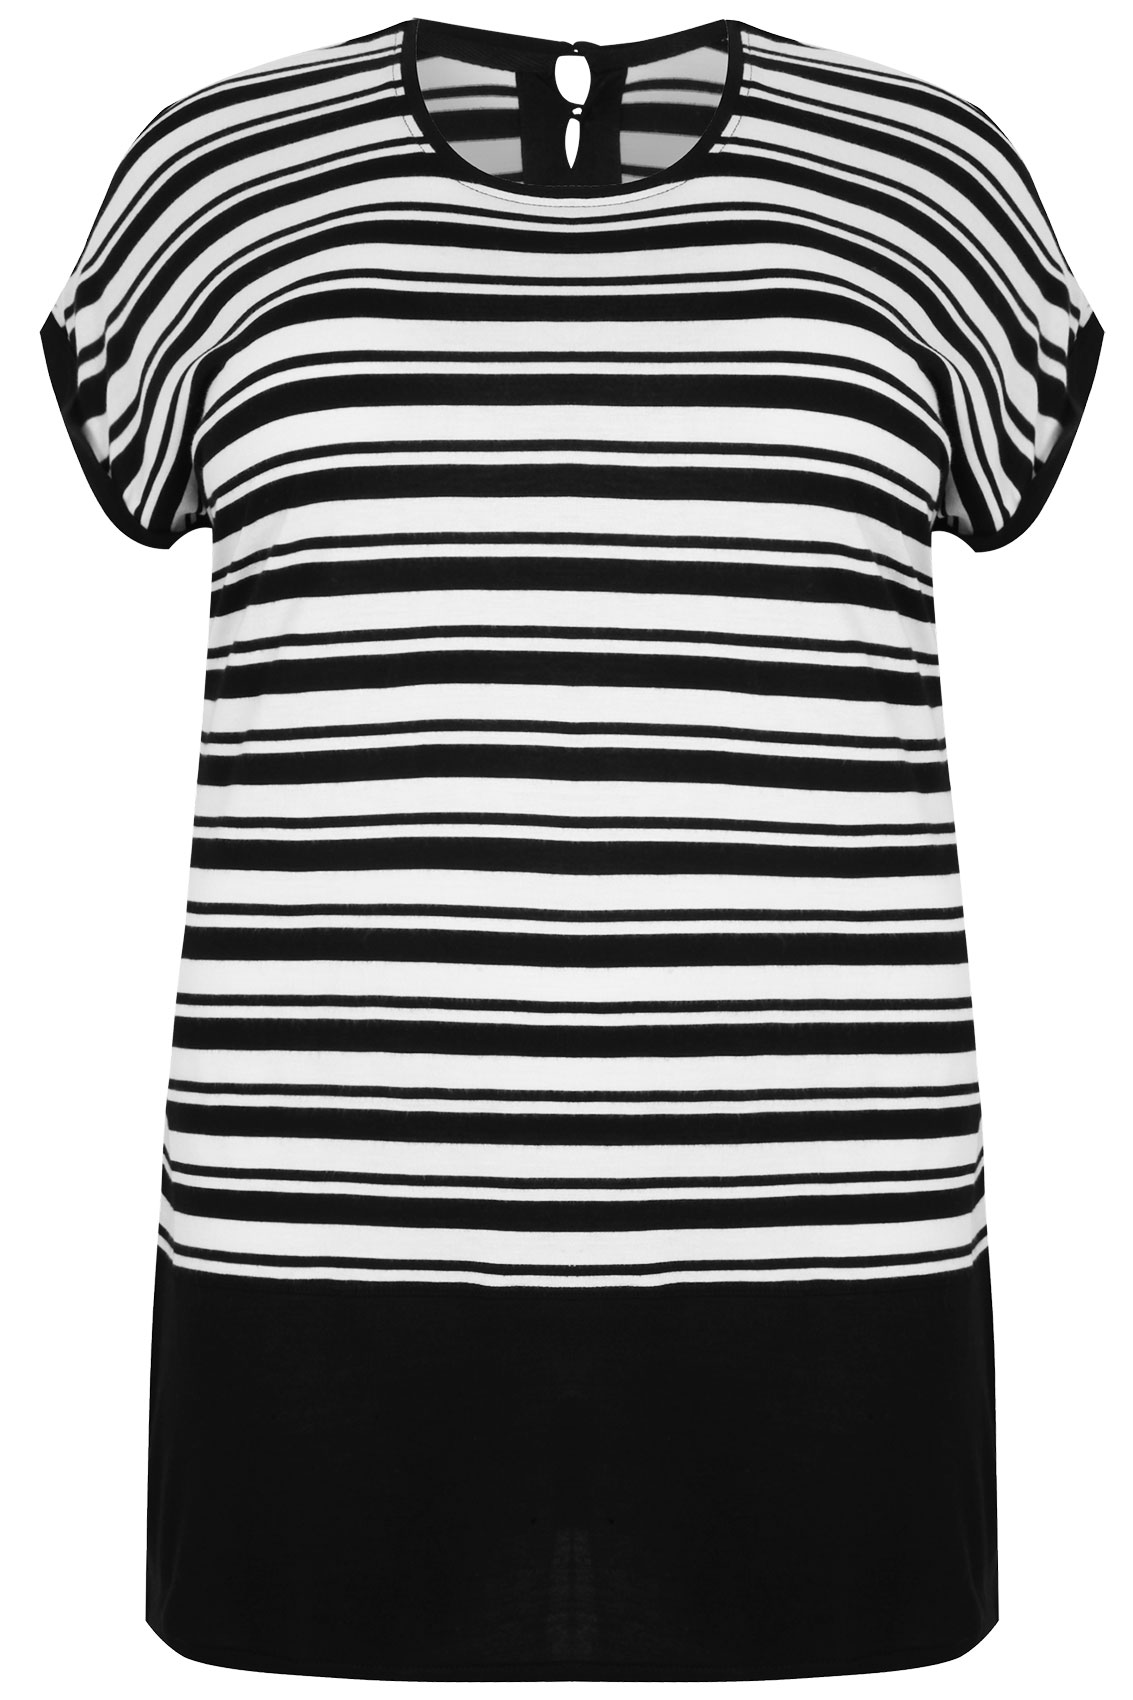 Black & White Colour Block Stripe Top With Short Sleeves plus Size 16 to 32